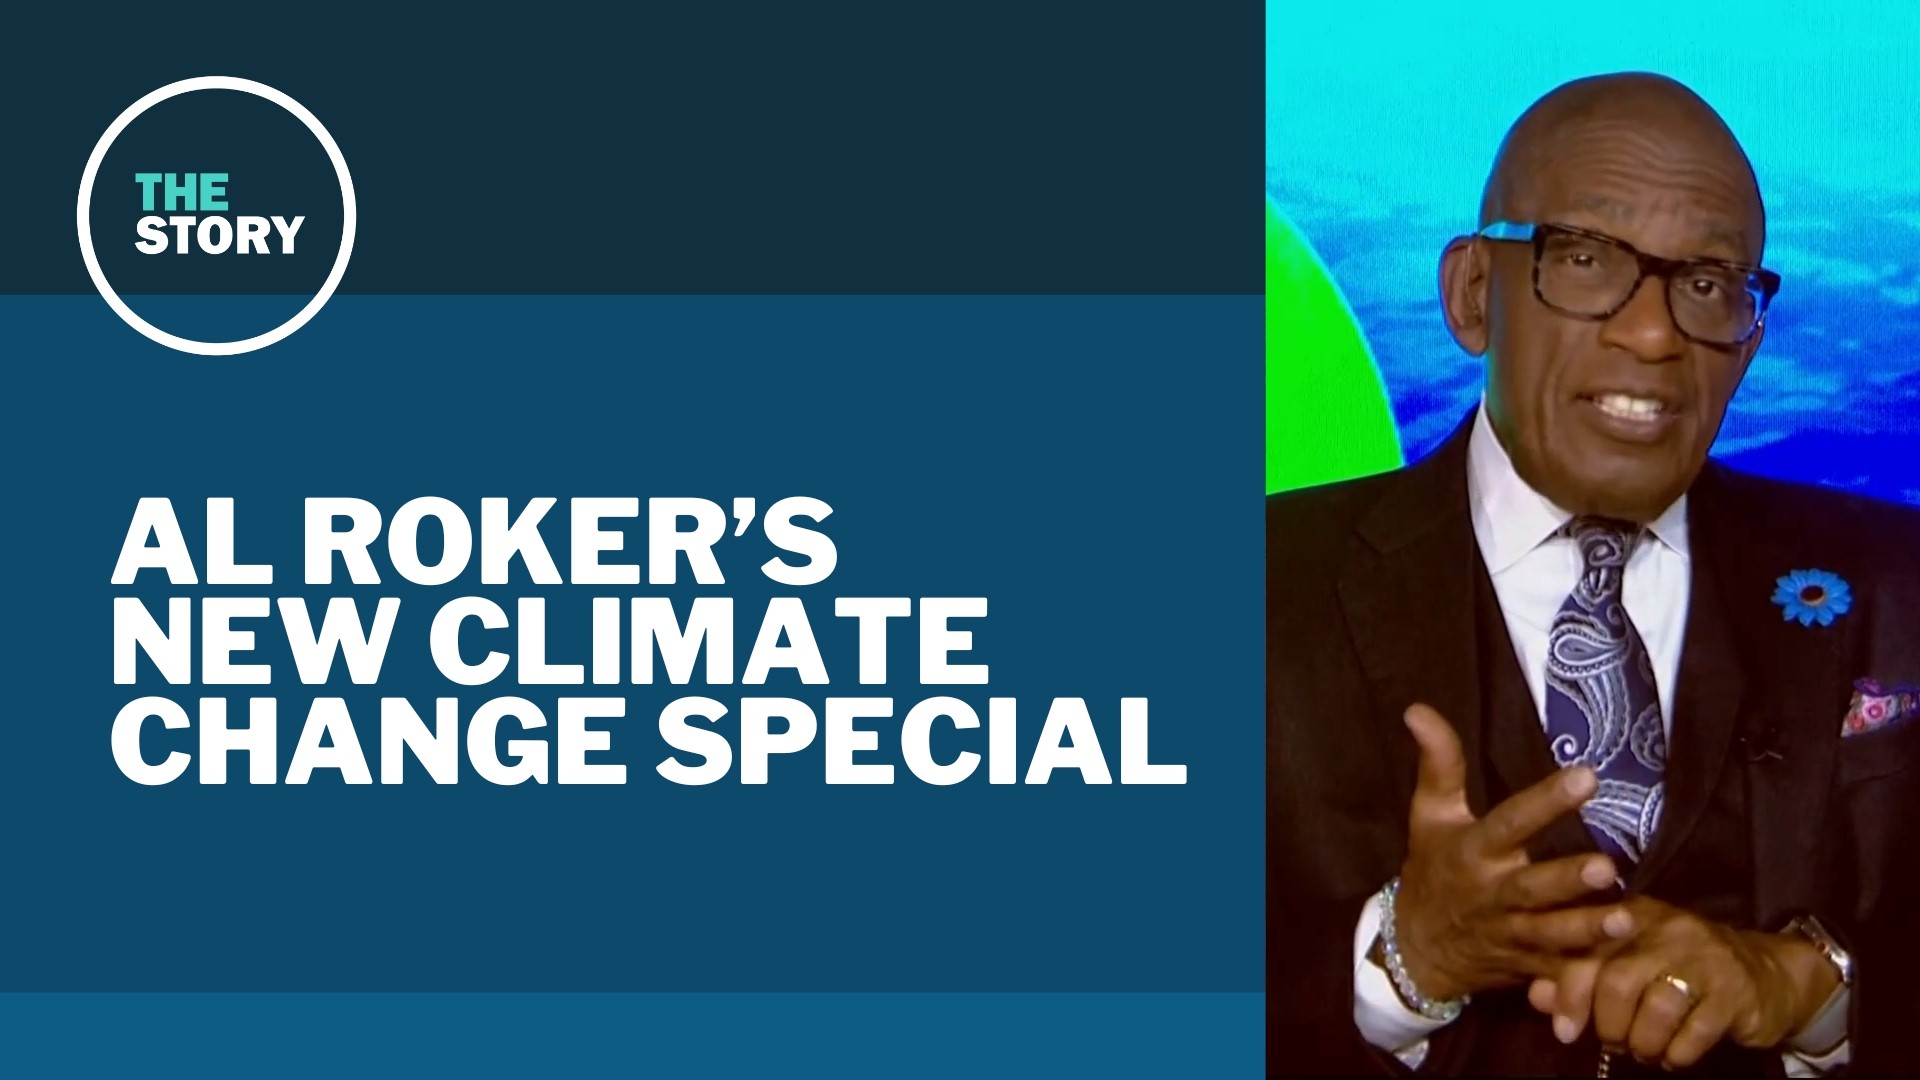 NBC’s Al Roker has a new special about climate change, and he recently talked with KGW environmental reporter Kale Williams about it.